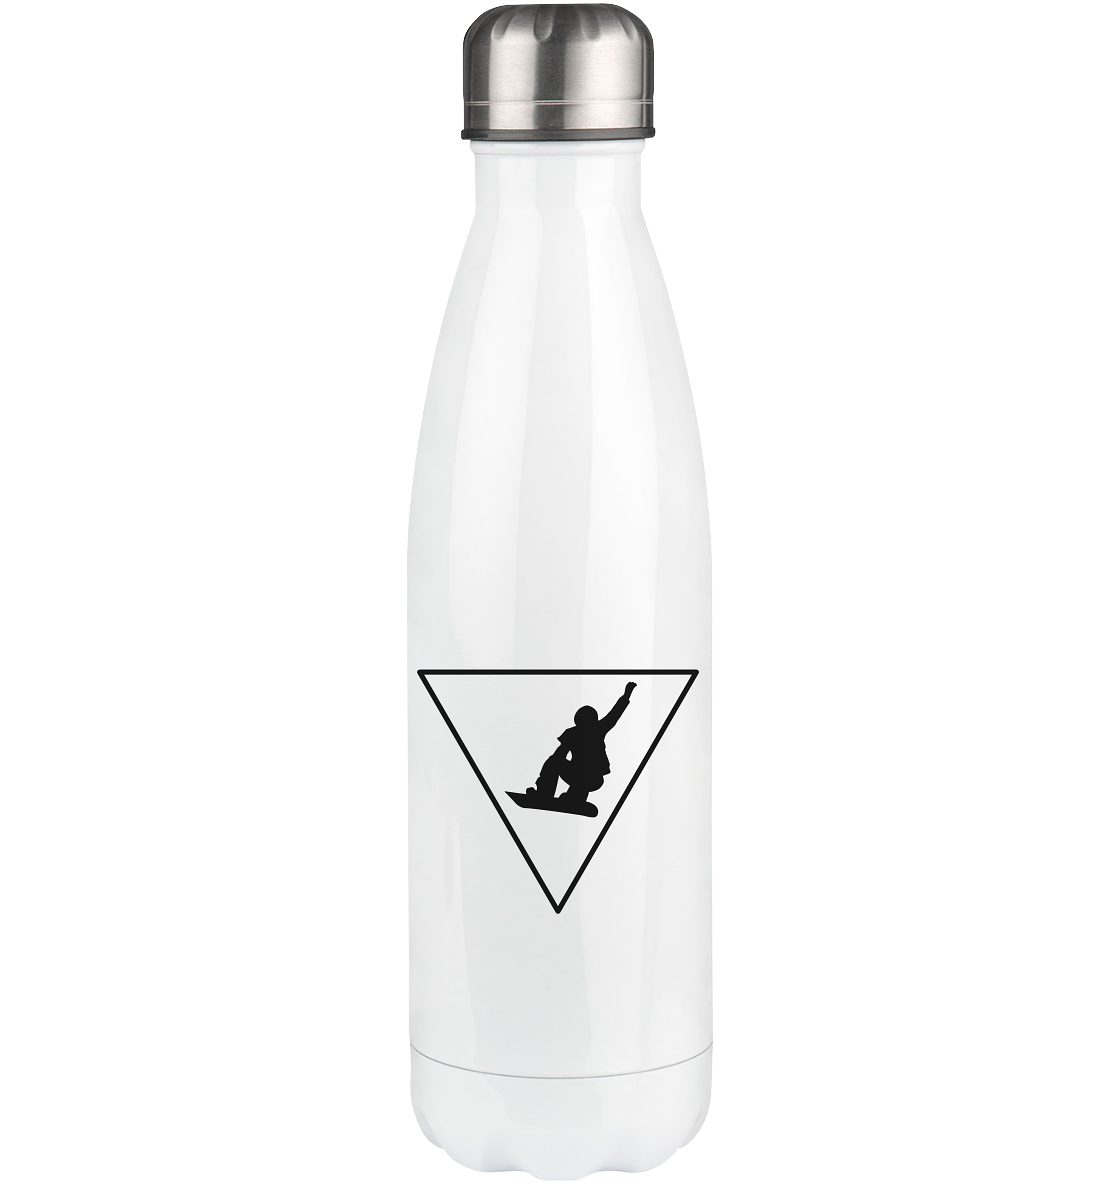 Triangle and Snowboarding - Edelstahl Thermosflasche snowboarden 500ml